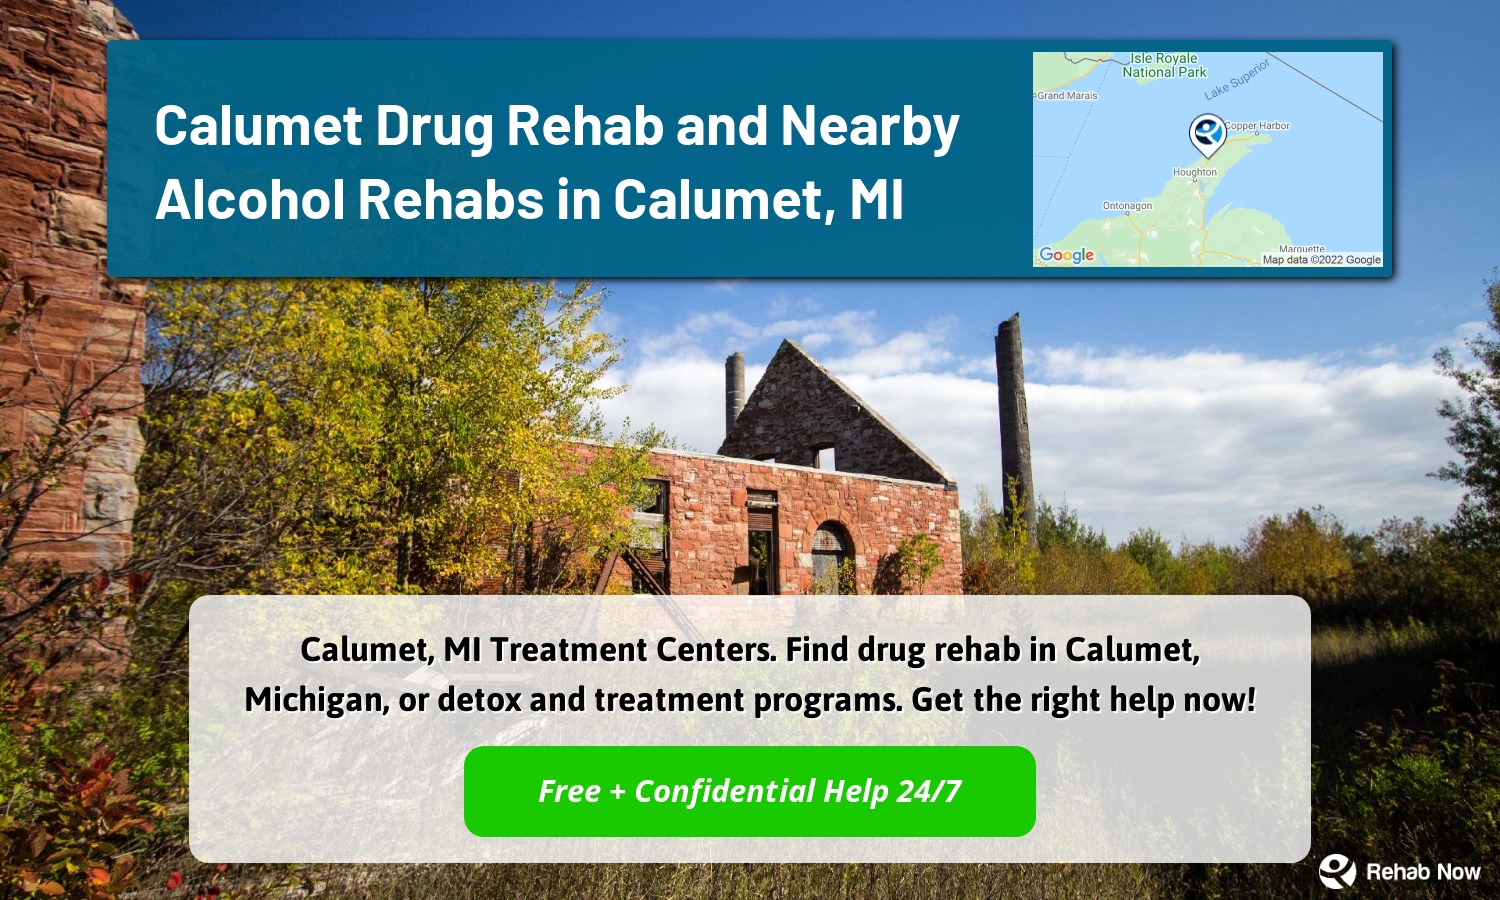 Calumet, MI Treatment Centers. Find drug rehab in Calumet, Michigan, or detox and treatment programs. Get the right help now!